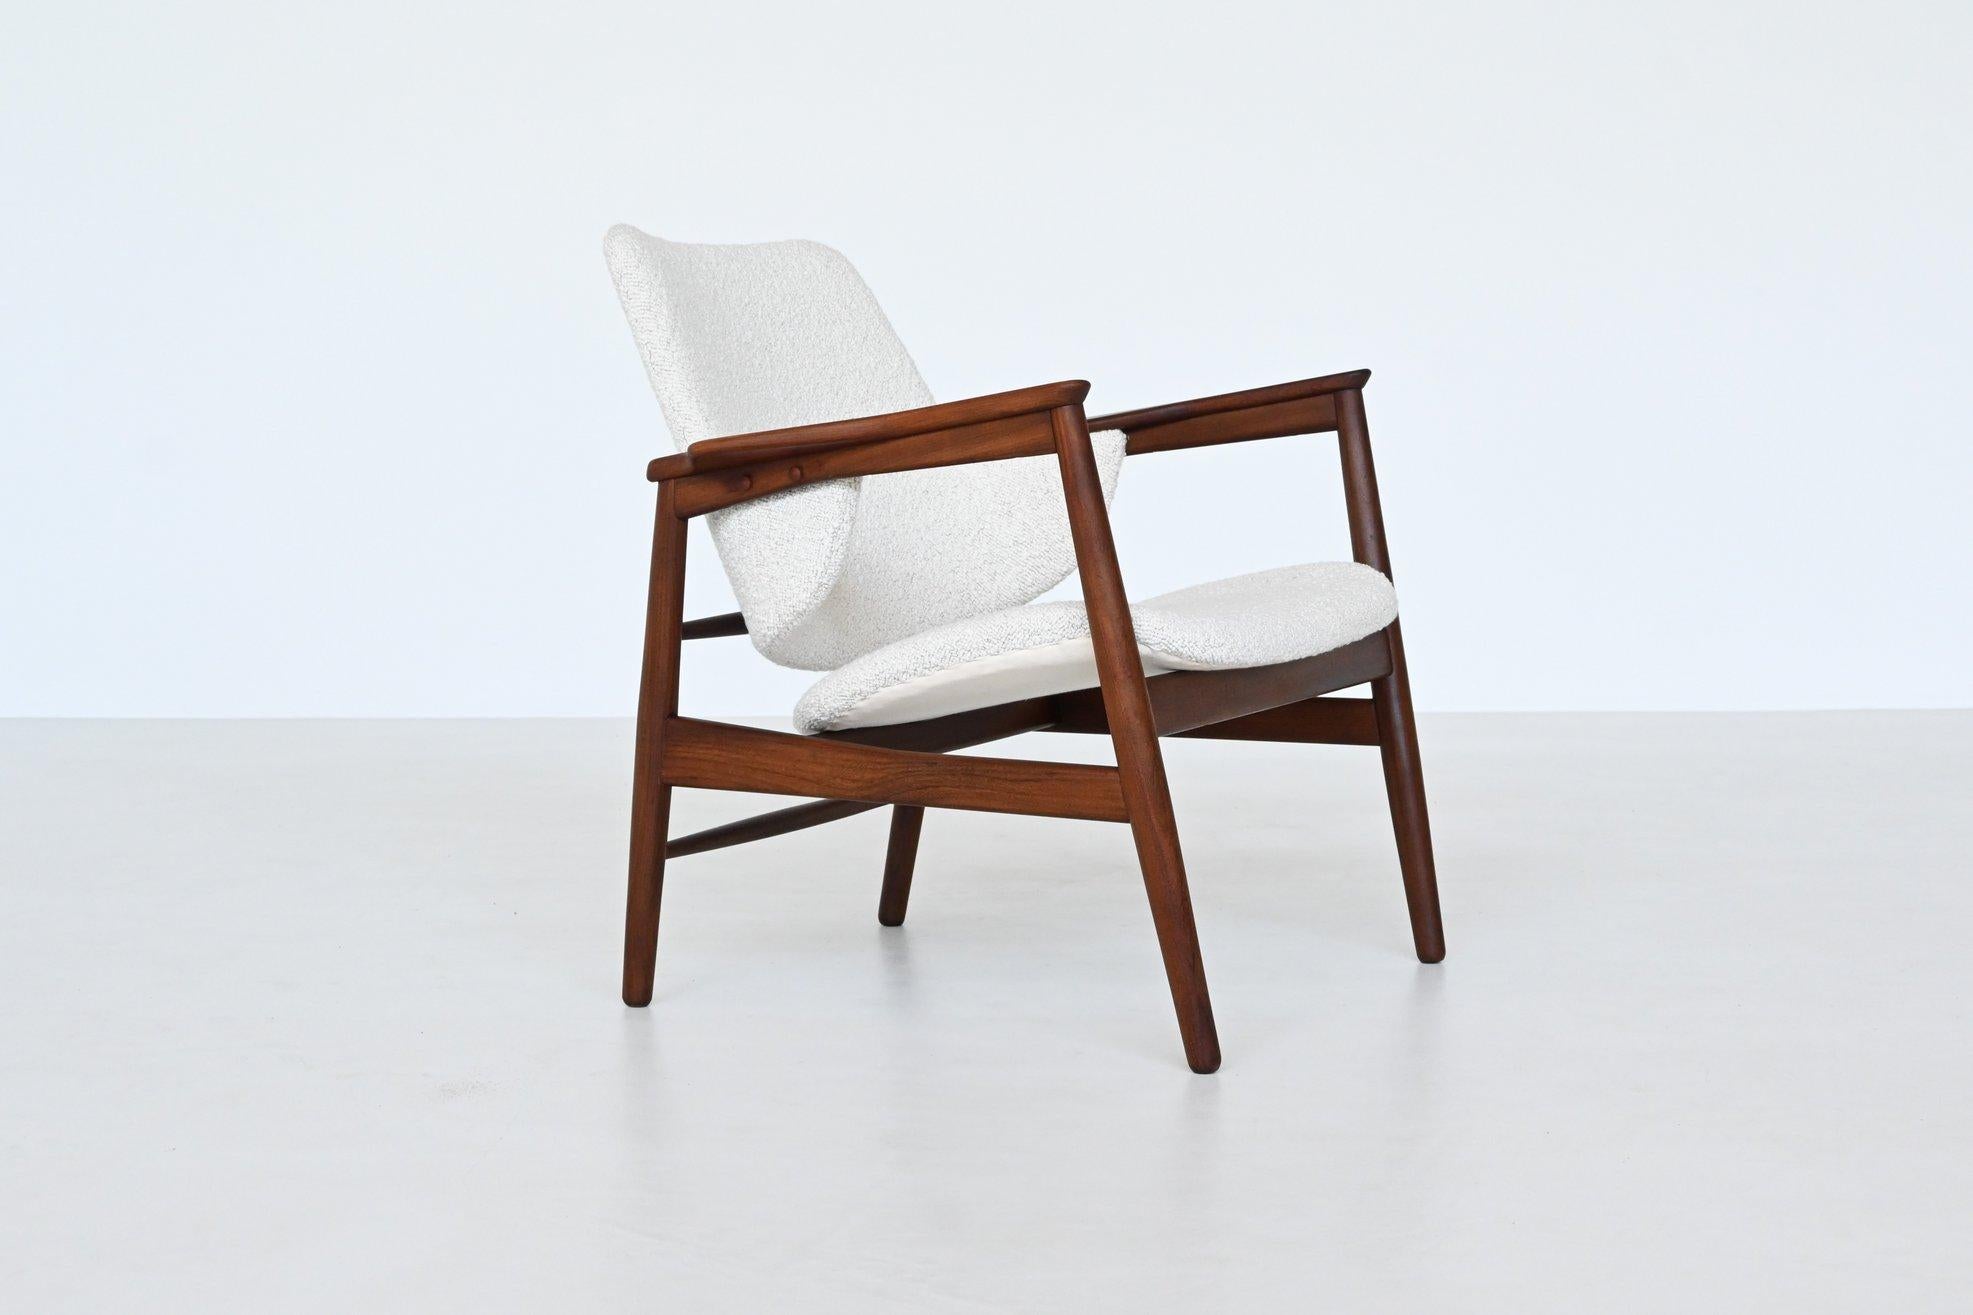 Stunning lounge chair designed by IB Kofod Larsen for Christensen & Larsen, Denmark 1953. This beautiful shaped and well-crafted chair has a solid teak wood frame and is newly upholstered with white bouclé fabric from Dedar Milano. The armrests